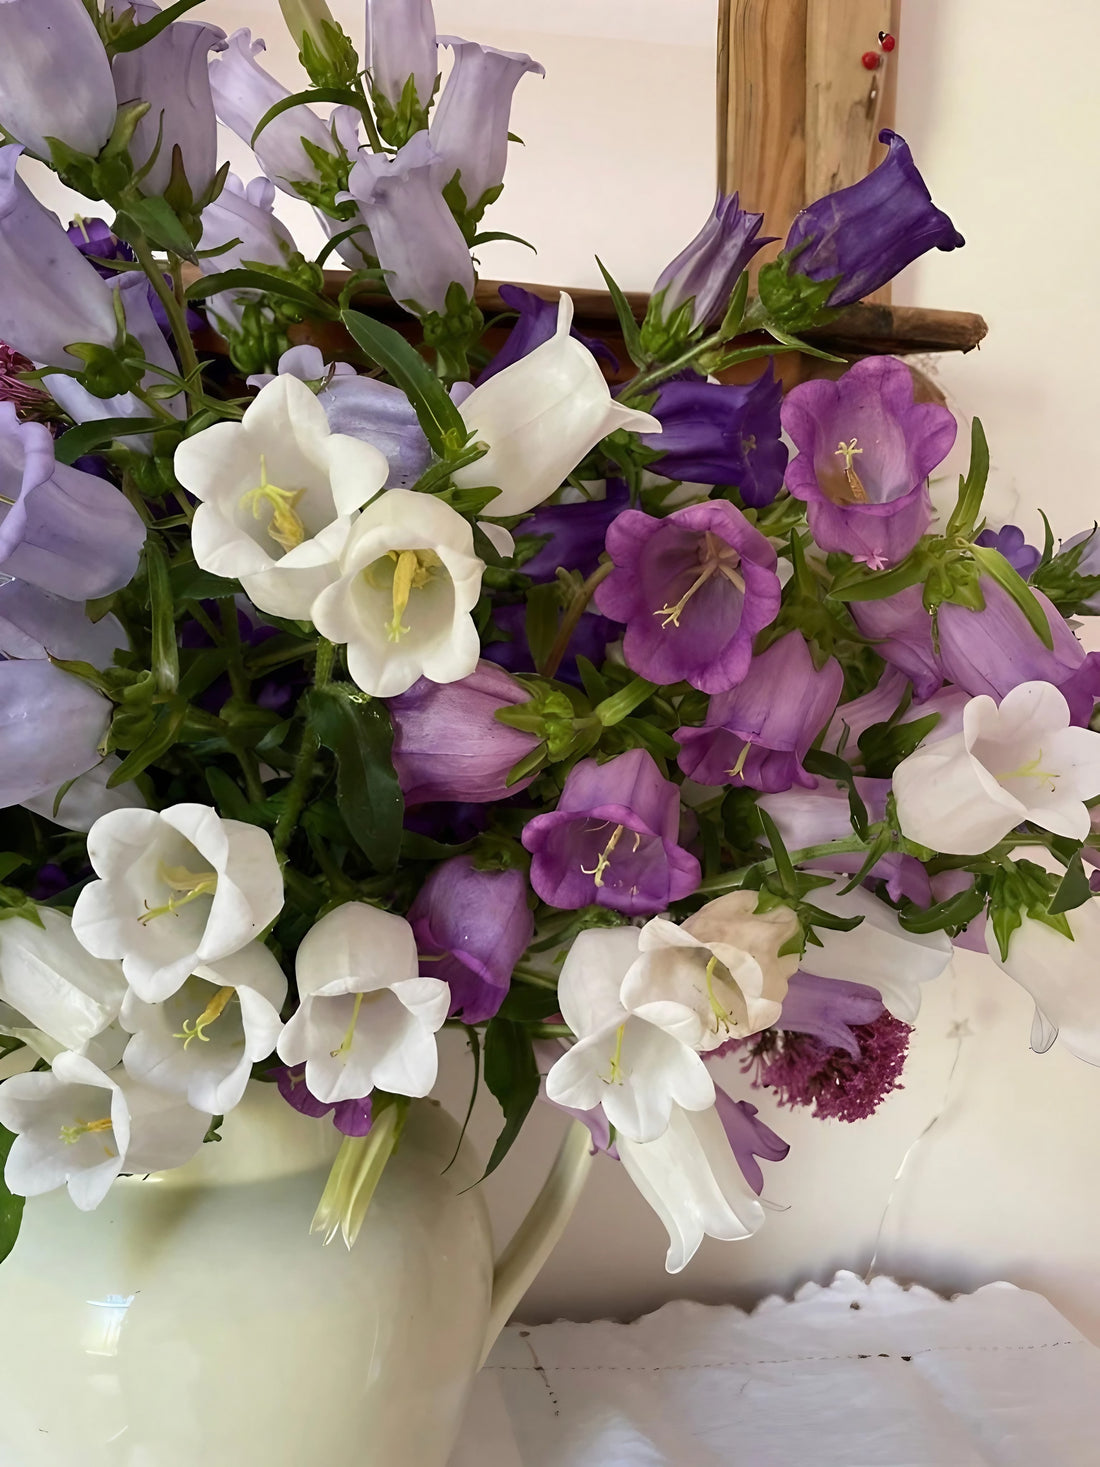 An arrangement of Canterbury Bells in a vase displaying purple and white hues